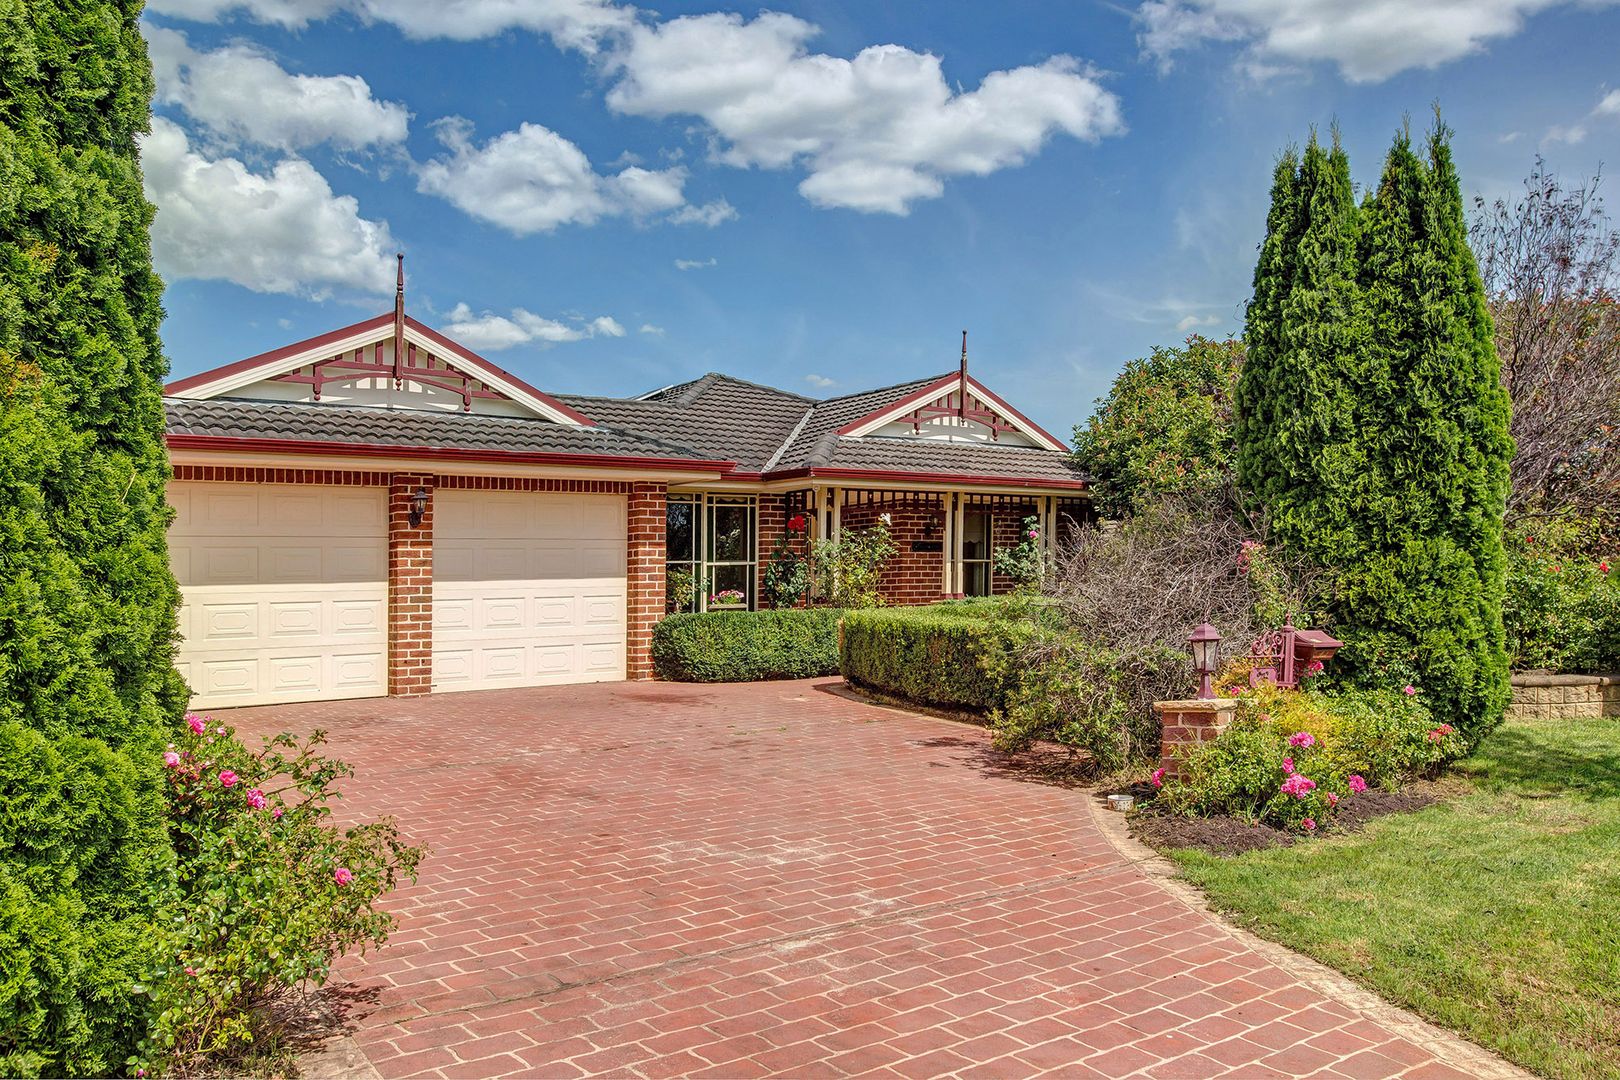 26 Glenquarry Crescent, Bowral | Property History & Address Research ...